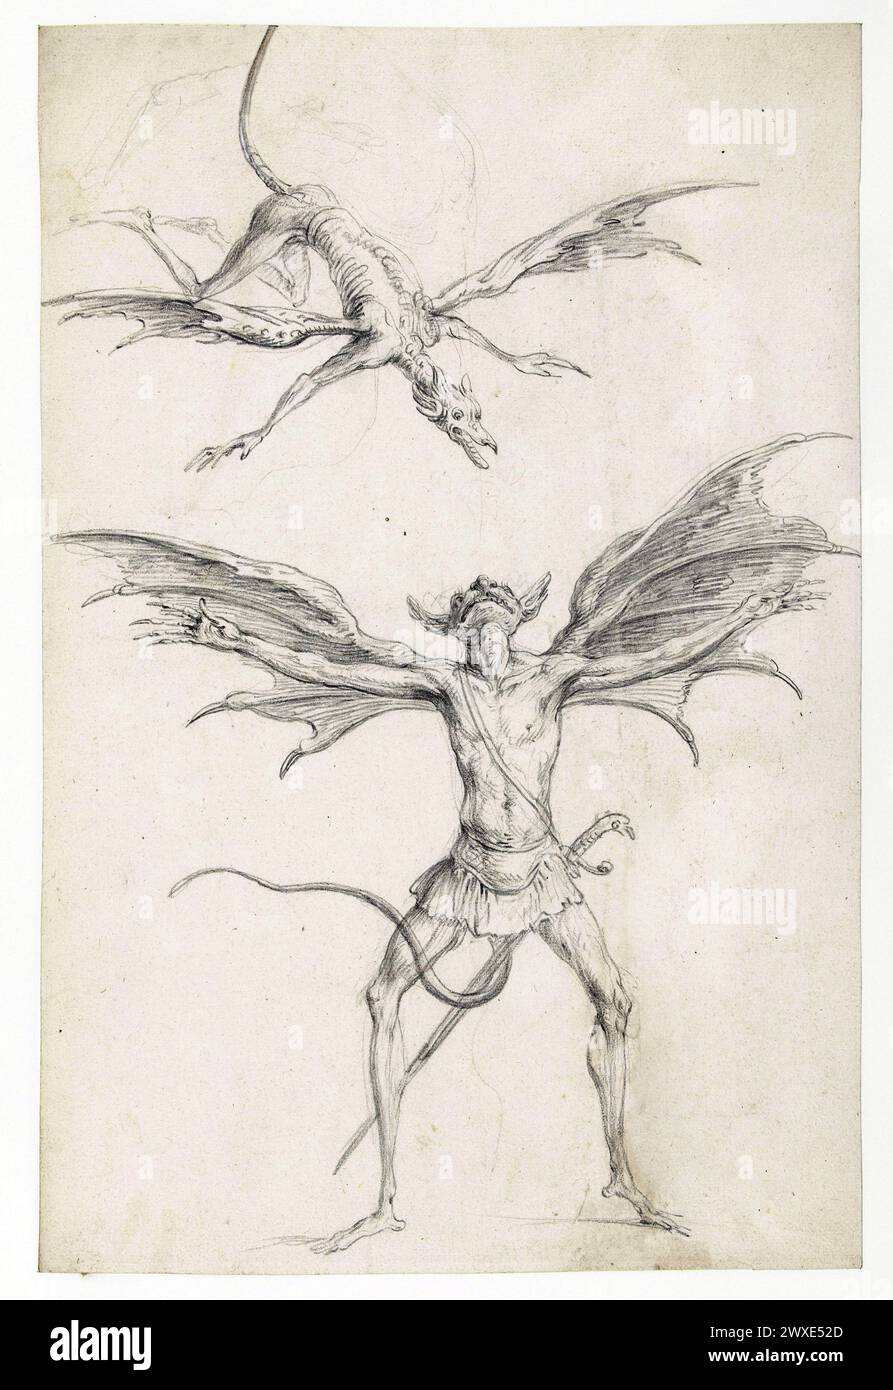 Lithographic print engraving of two winged mythical creatures. Studies for the Figuration of Haunted Houses (Studies voor de figuratie van spokerijen)  - series title)). A flying, skinny demonic creature approaches a another, with his legs spread apart and his arms and wings spread out, waiting for him.  Cornelis Saftleven, Dutch, 1617 - 1681 Stock Photo